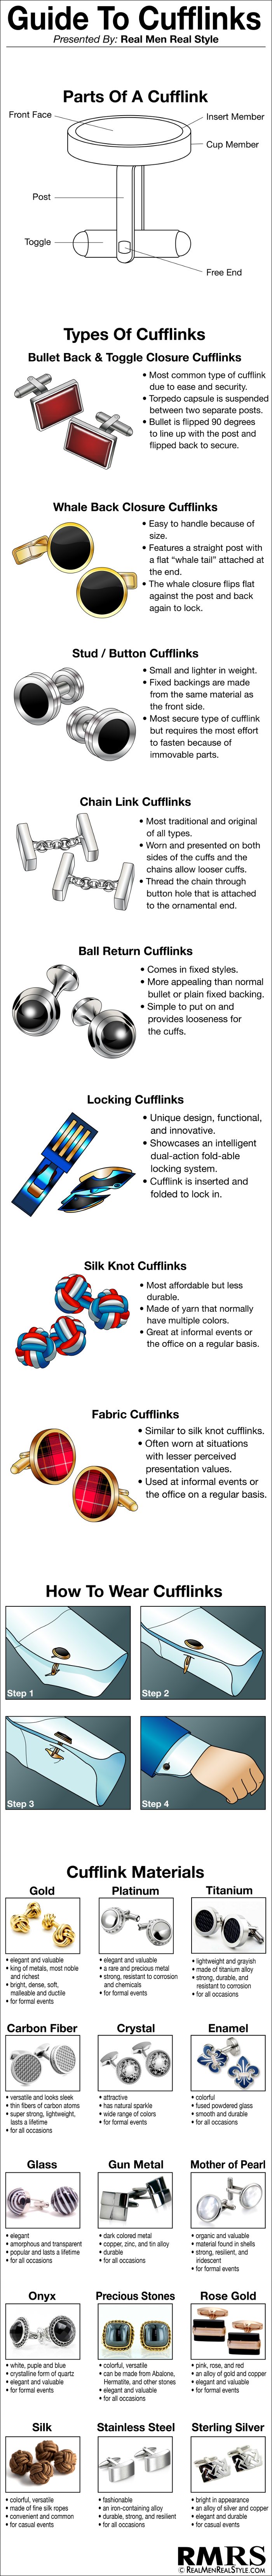 Guide To Cufflinks Infographic 700